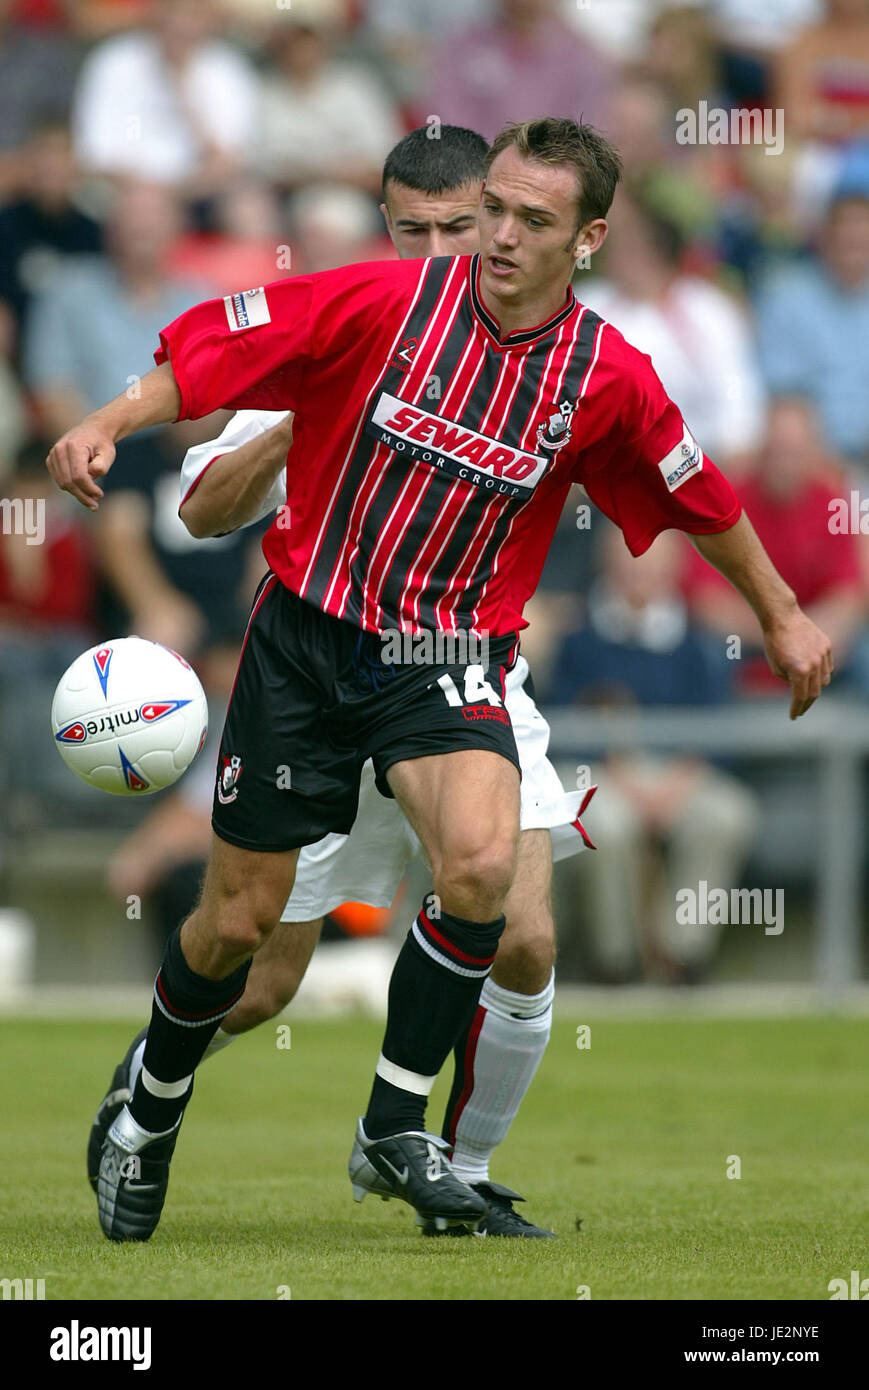 JAMES HAYTER BOURNMOUTH BOURNMOUTH AFC 27 Juillet 2002 Banque D'Images